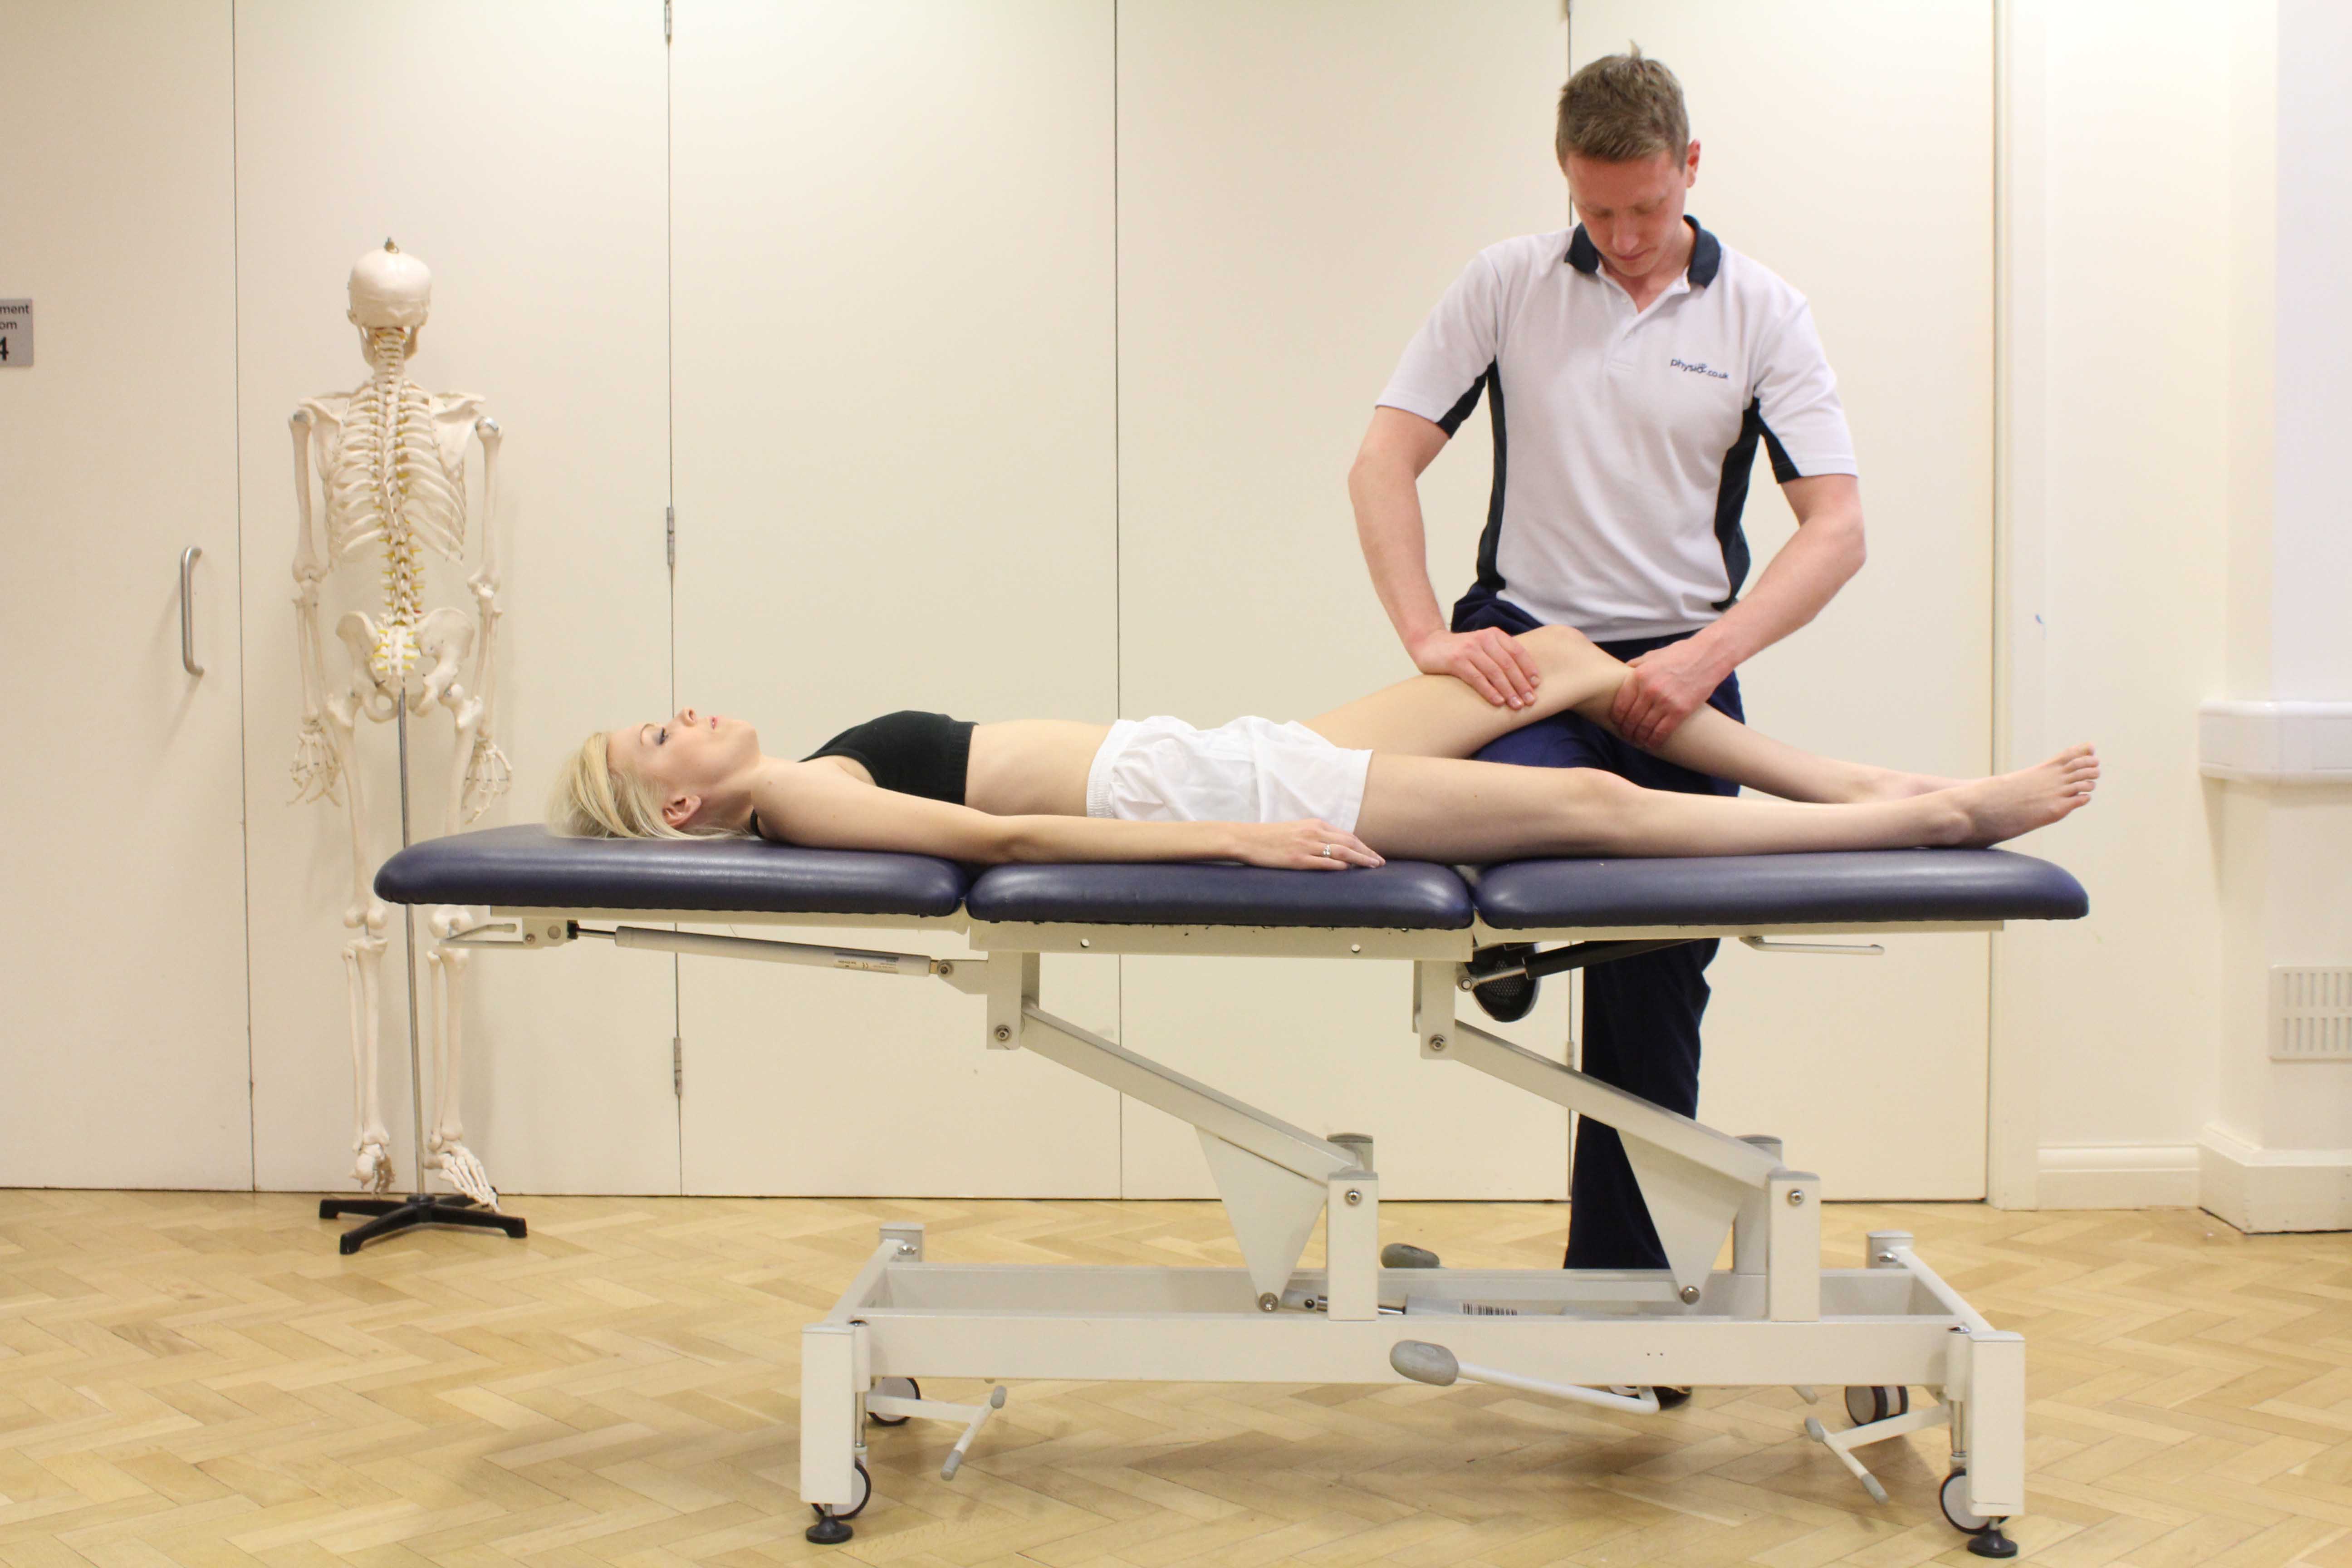 Mobilisations of the knee joint by a MSK therapist